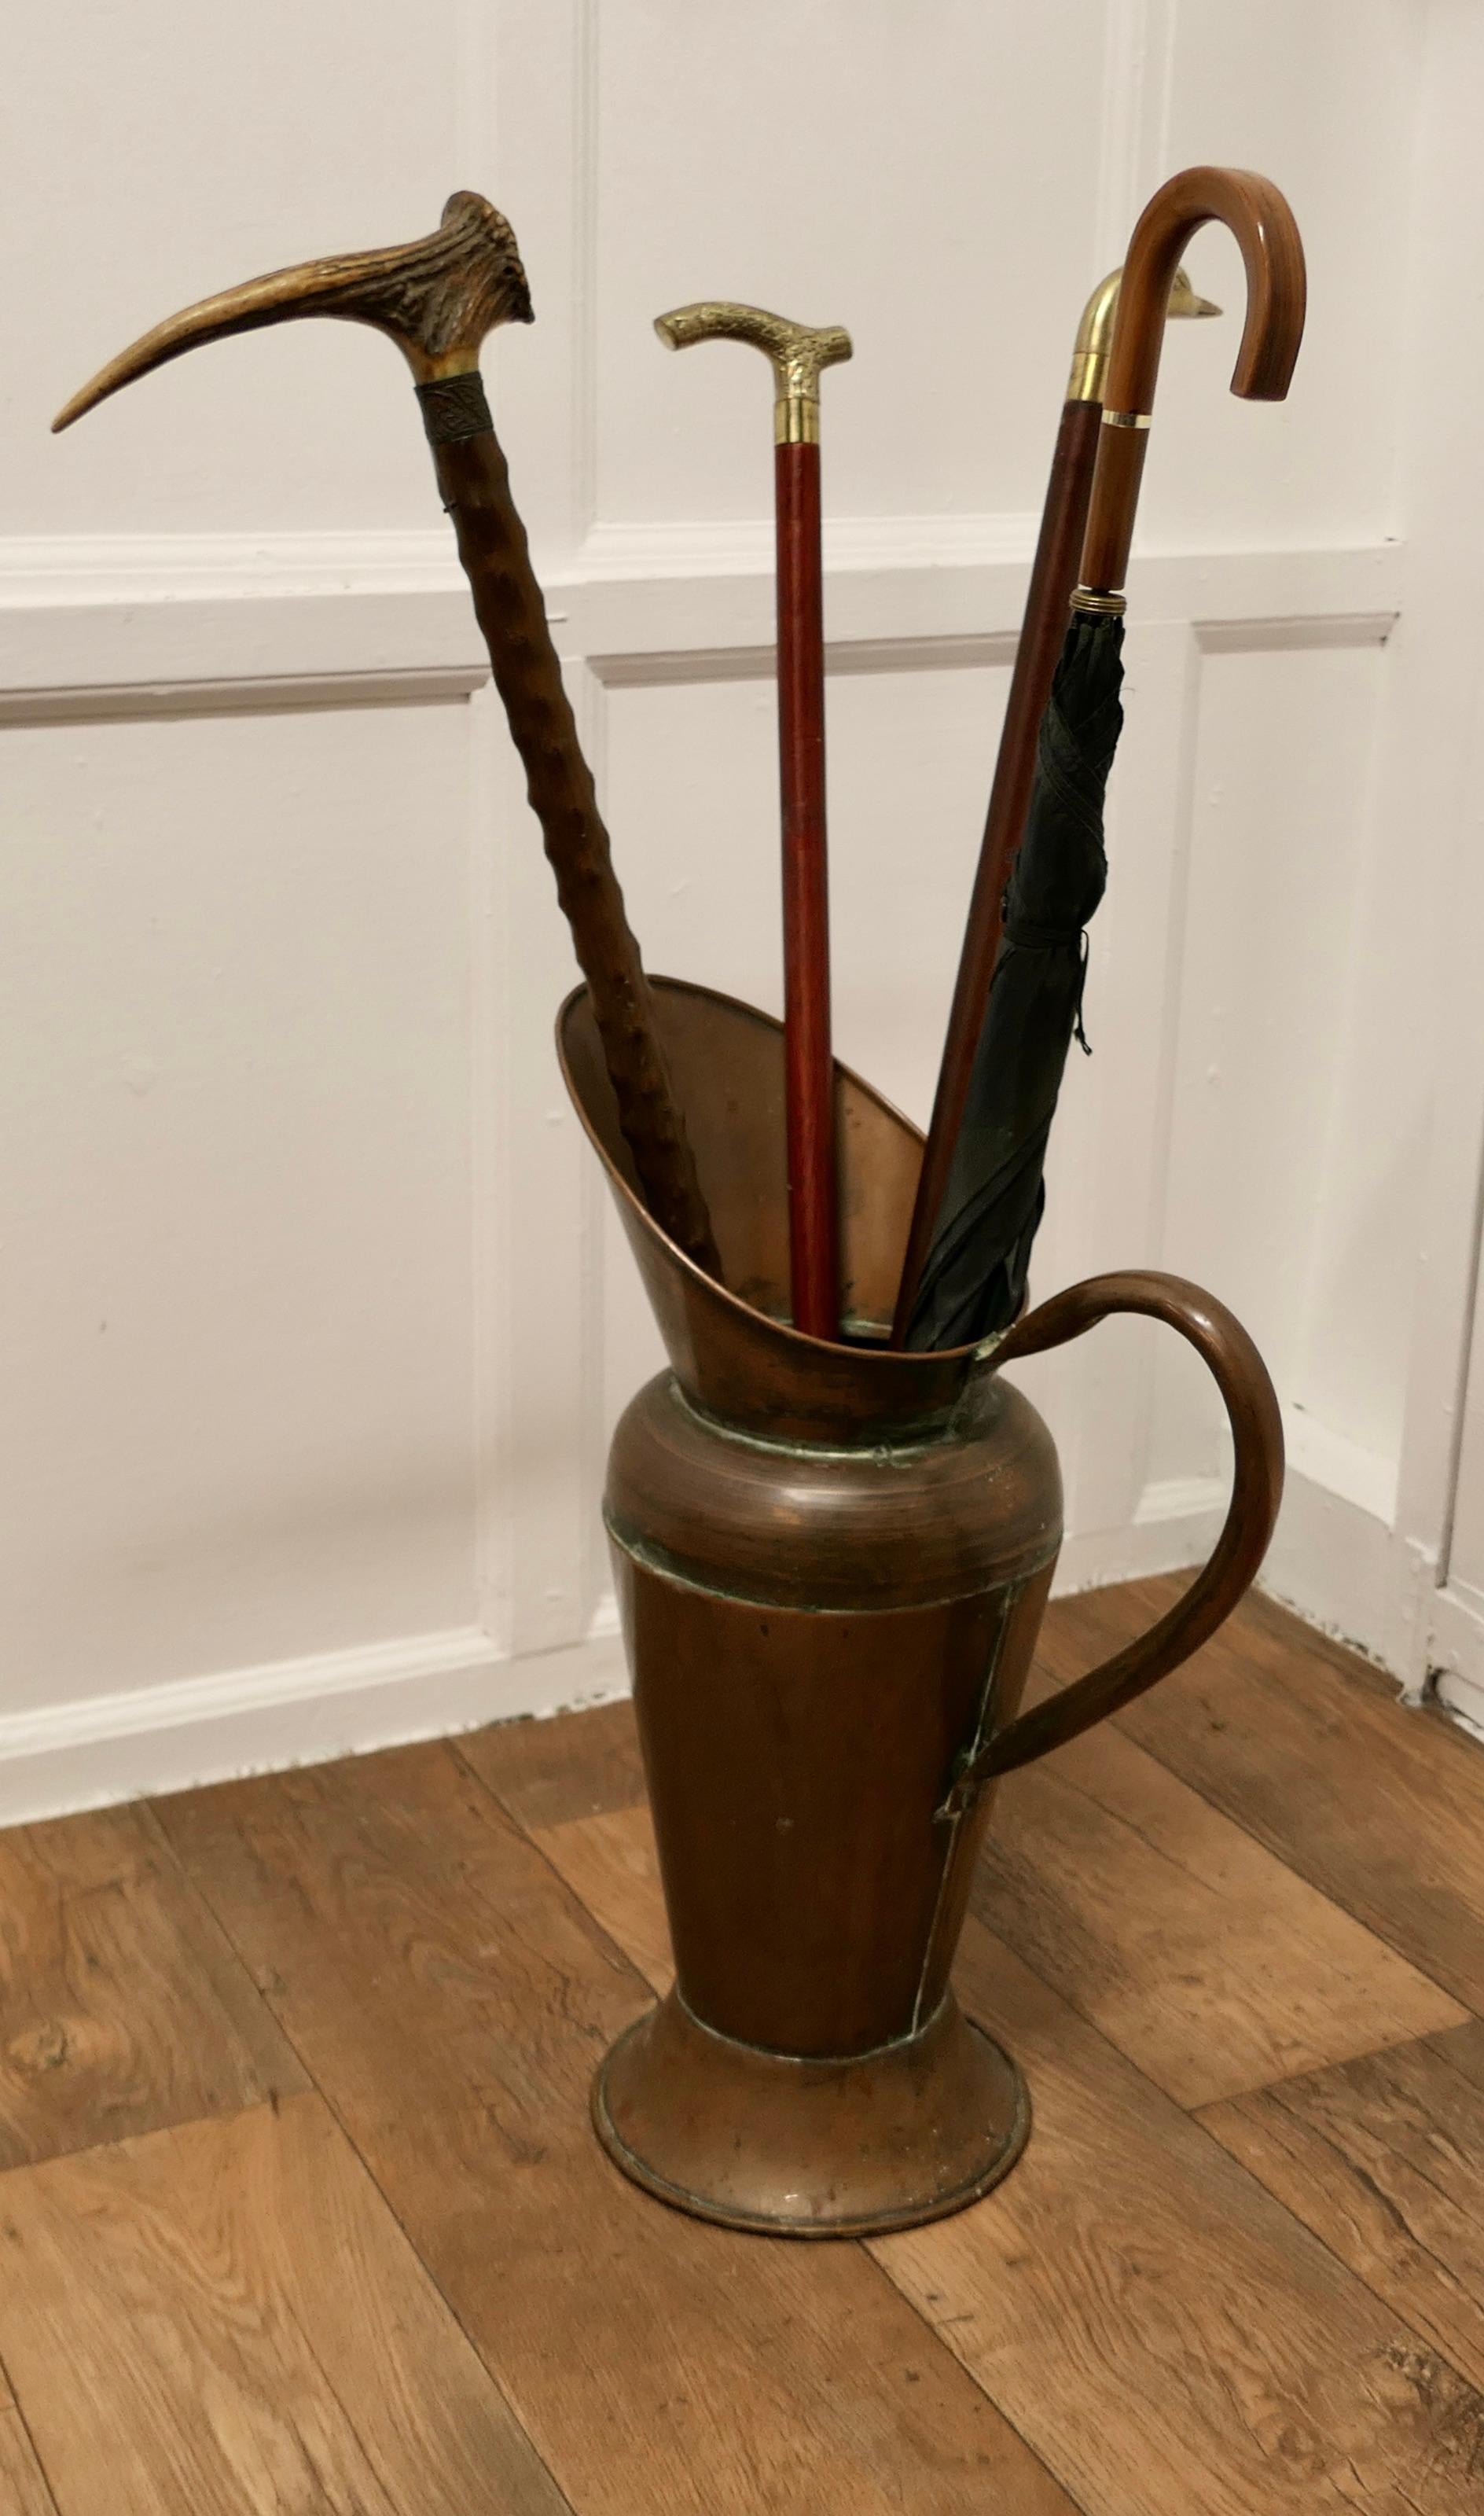 2ft tall Copper Jug Shop Display

This is a great piece, it is made in hand beaten copper, which has a beautiful aged colour
I expect the Jug was originally an advertising piece for a coffee shop or tea room and all hand made, it is in good